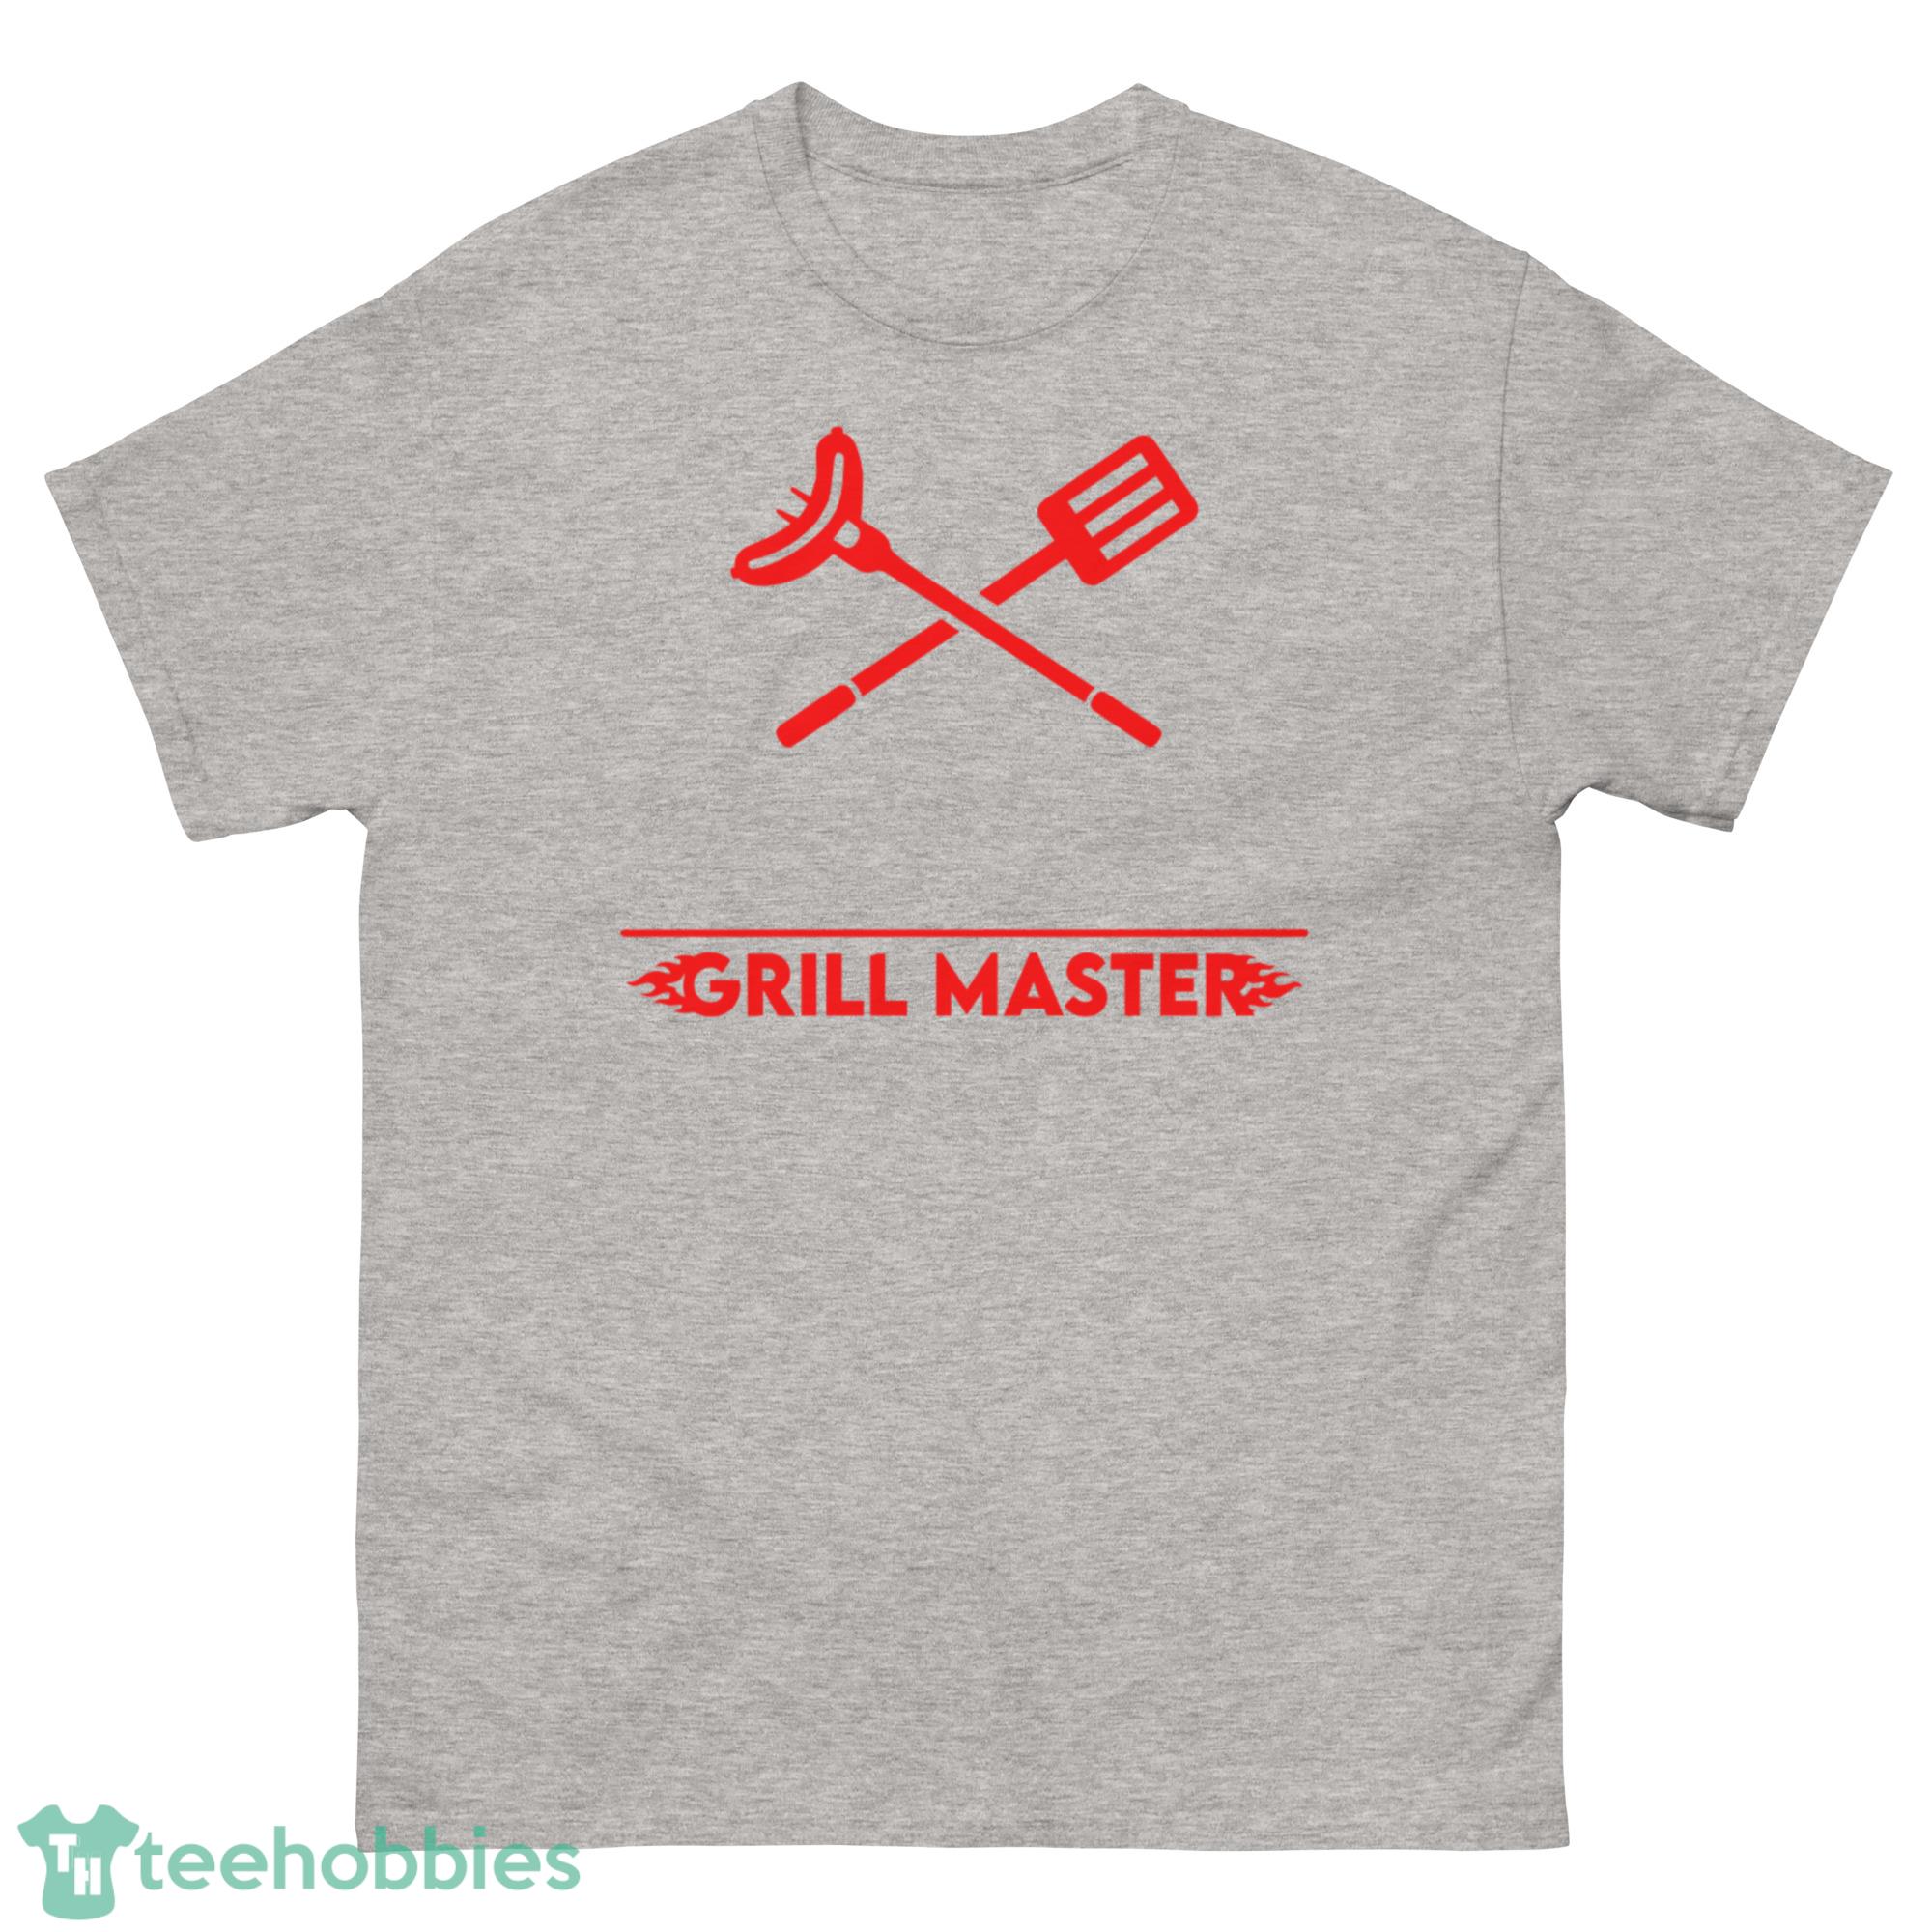 Grill Master Personalized Name Apron Red Shirt - G500 Men’s Classic T-Shirt